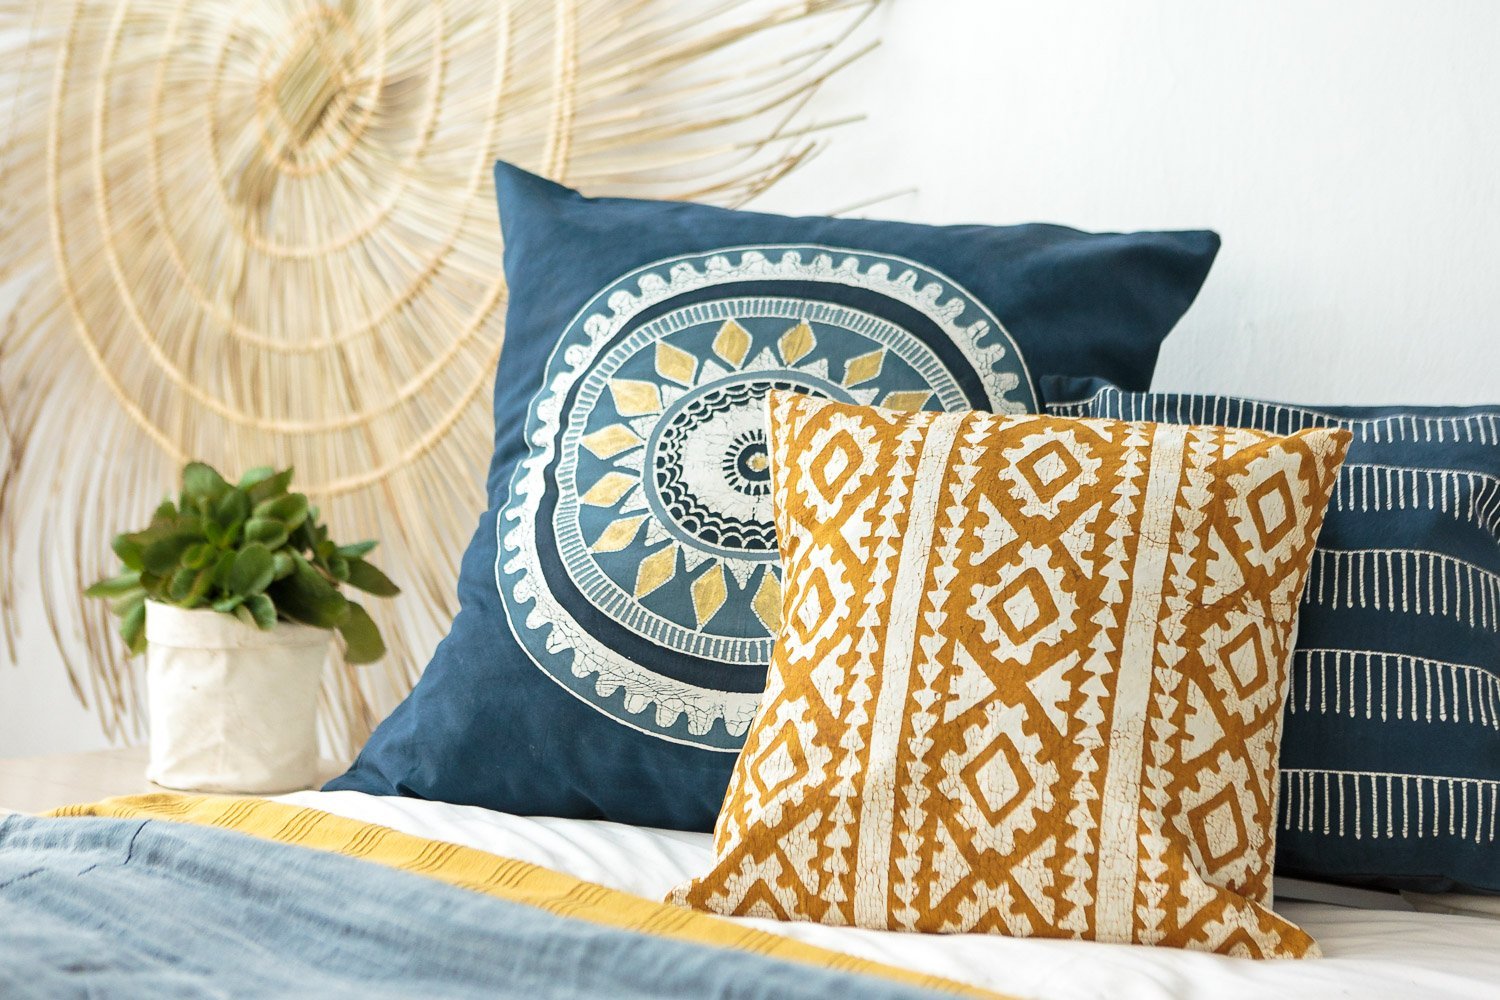 Moroccan Crackles Mustard Cushion Cover - Hand Painted by TRIBAL TEXTILES - Handcrafted Home Decor Interiors - African Made